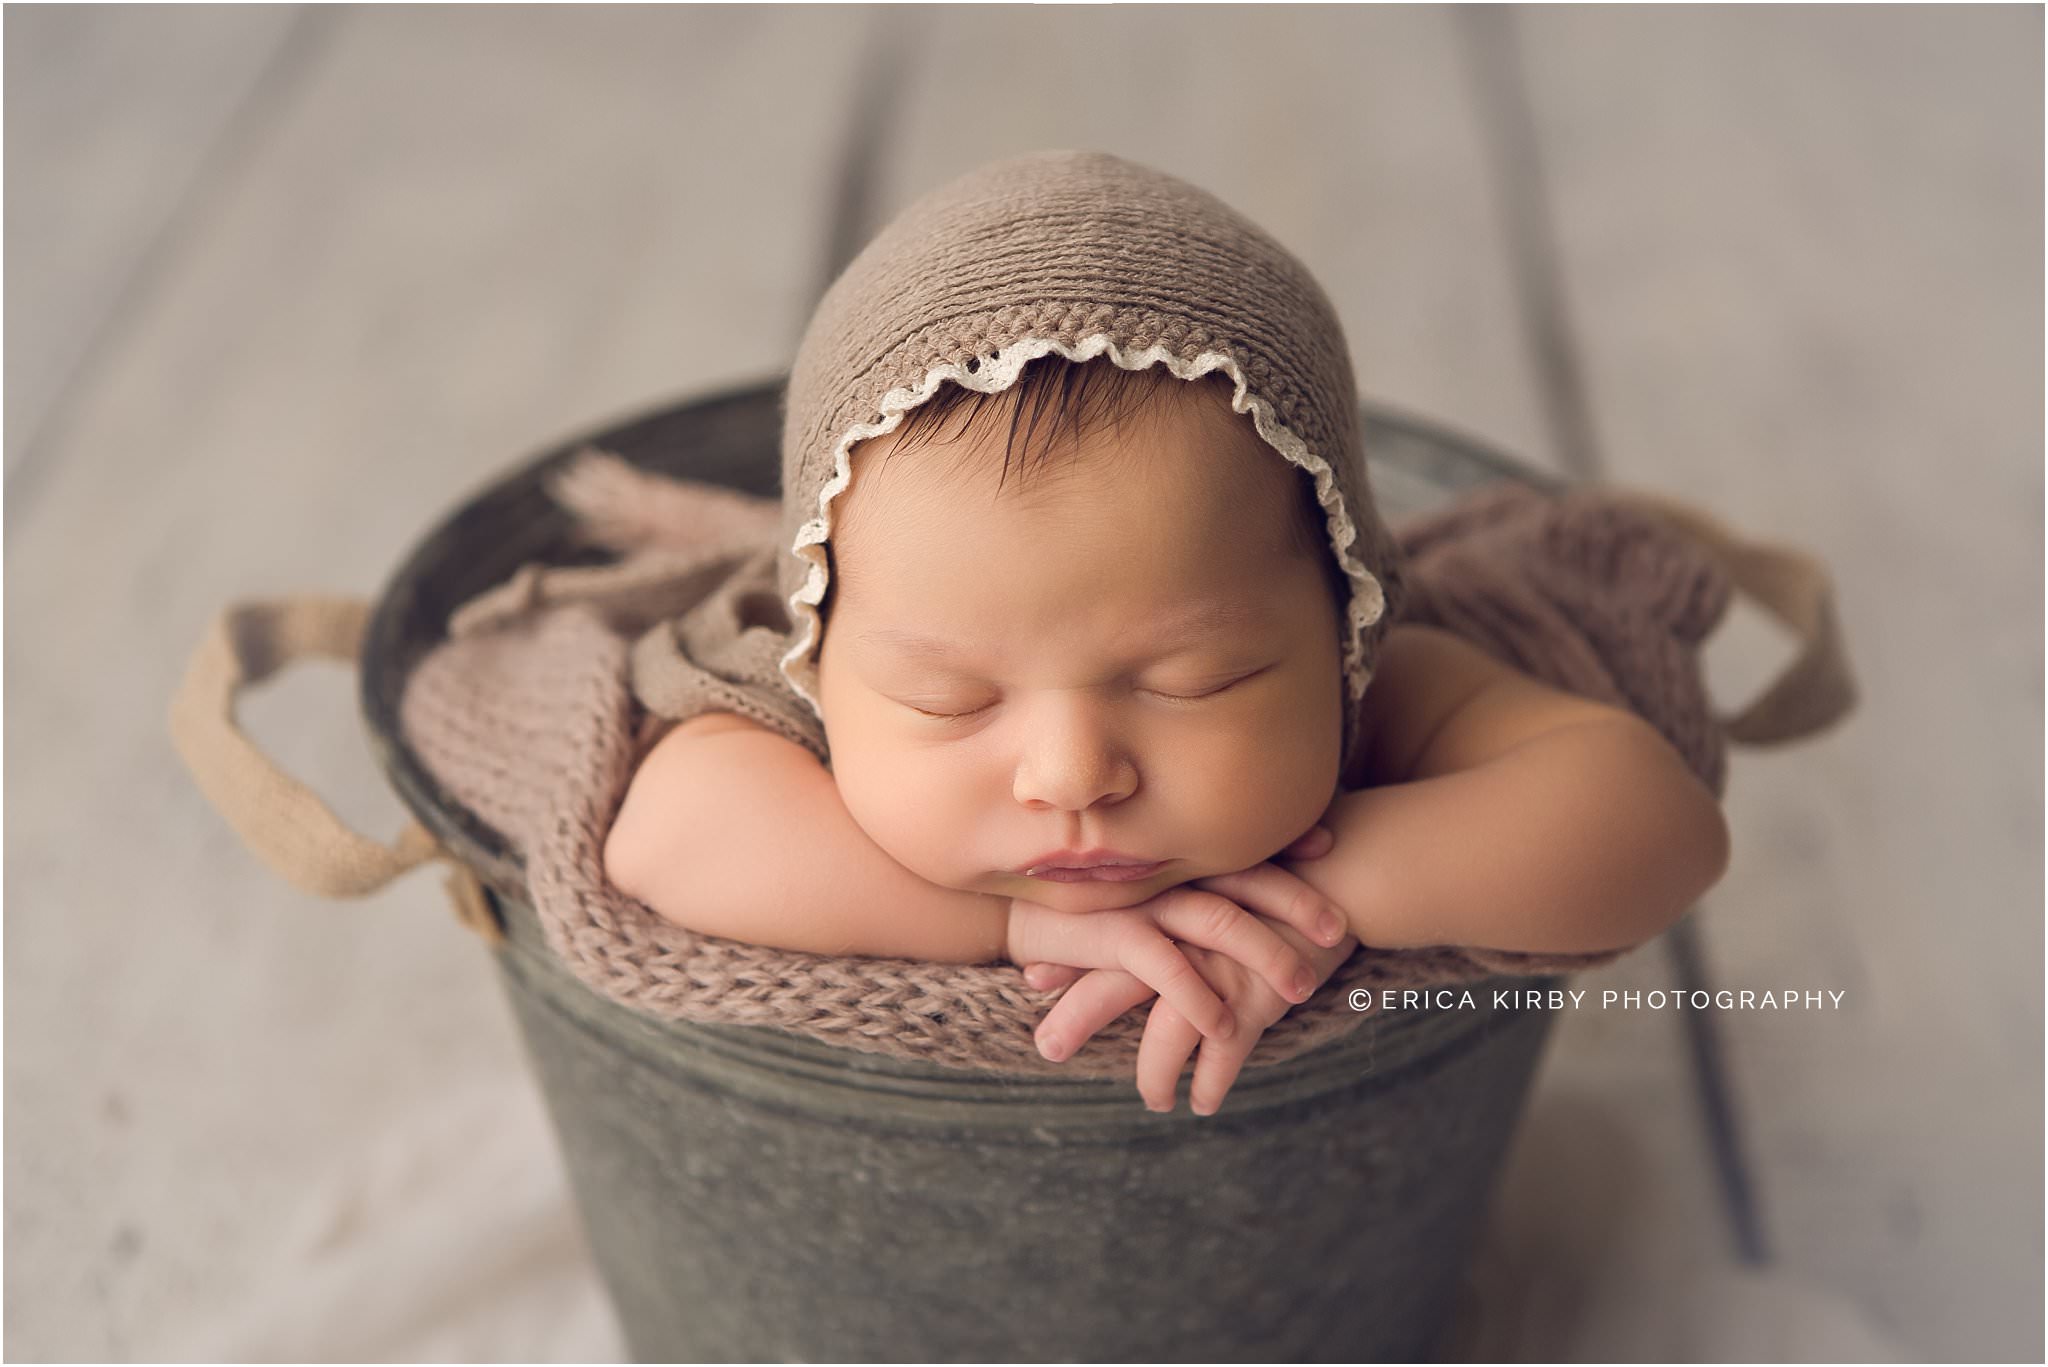 Studio Newborn Session Northwest Arkansas - baby girl newborn session with soft colors classic posing in studio - erica kirby photography